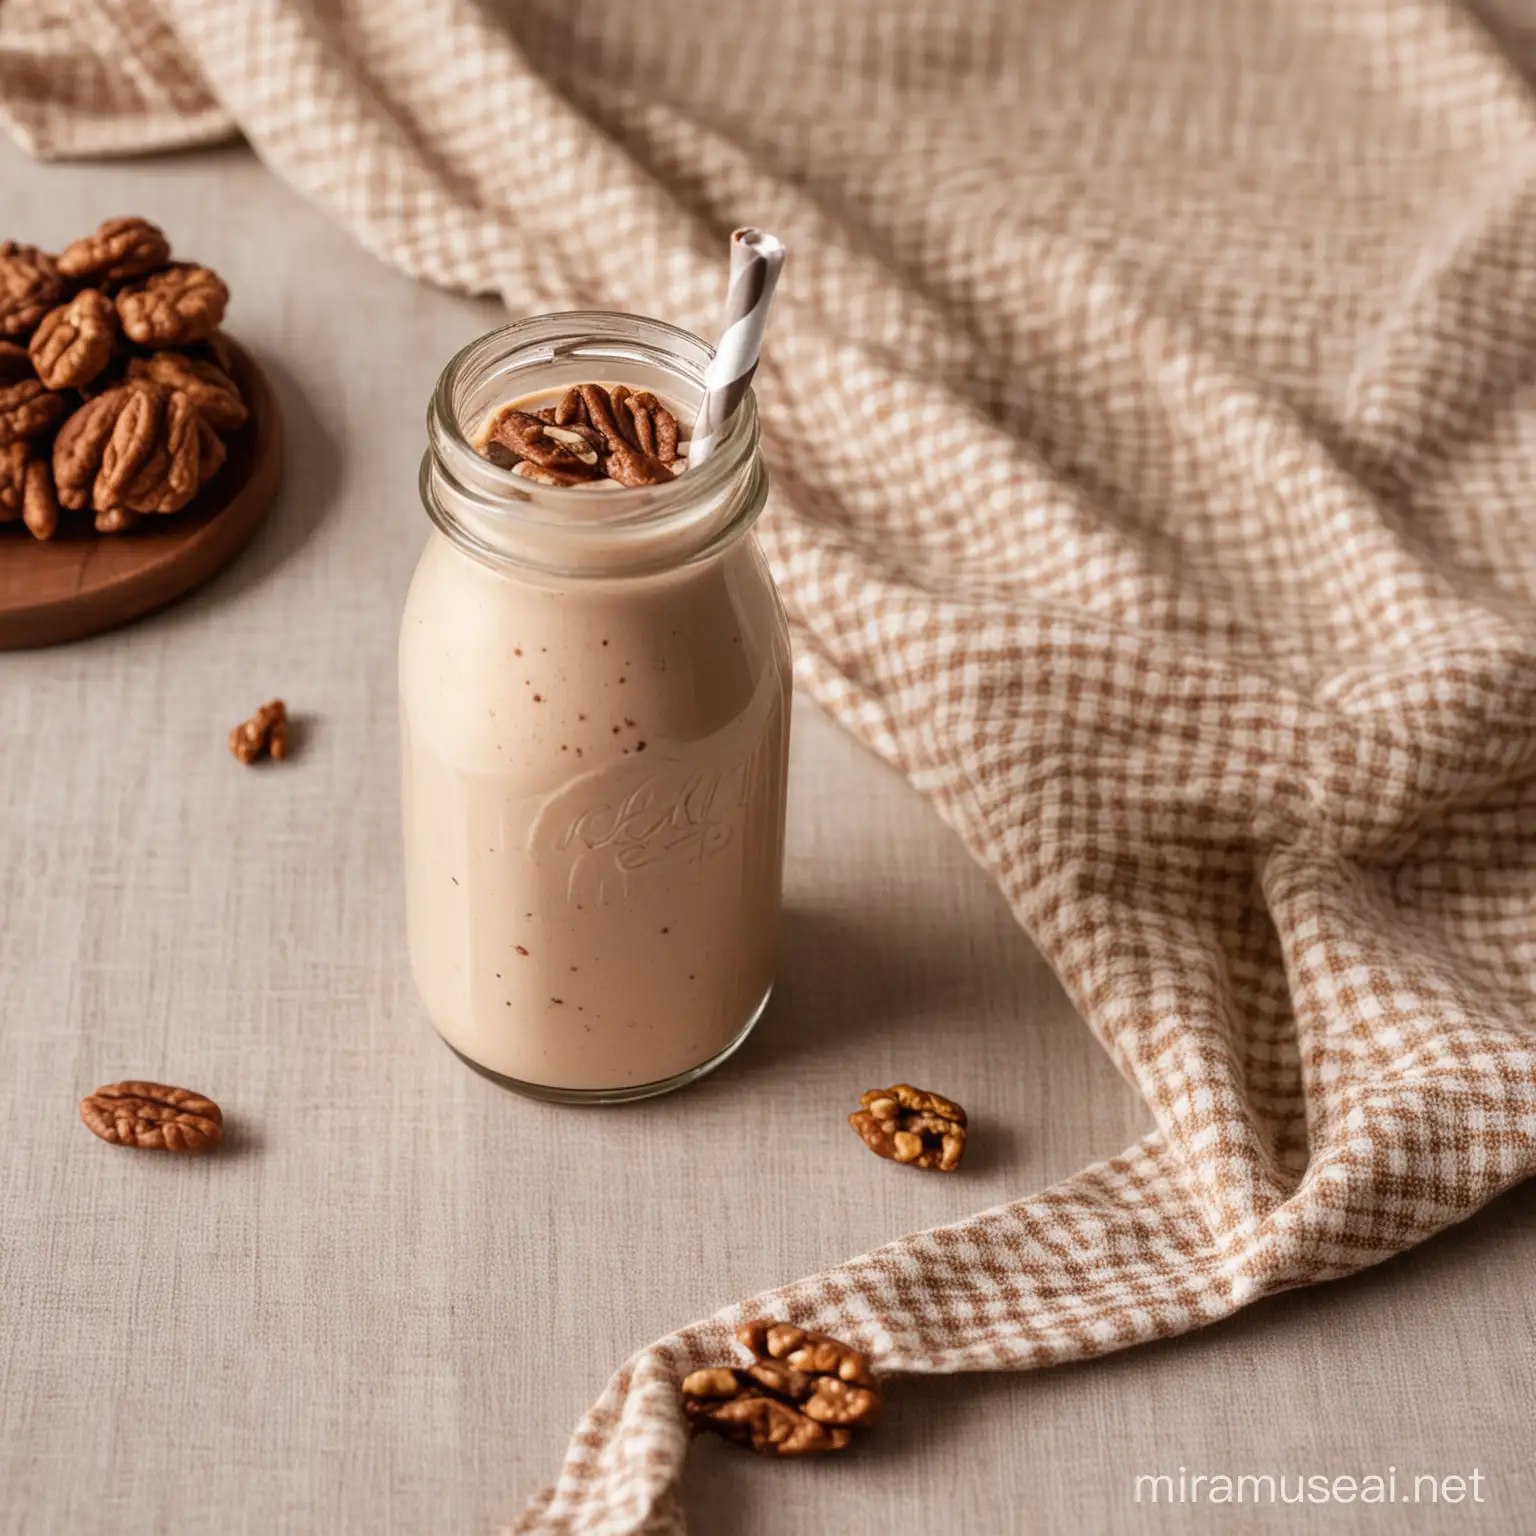 Delicious Cocoa Walnut Milkshake on Table with Elegant Tablecloth